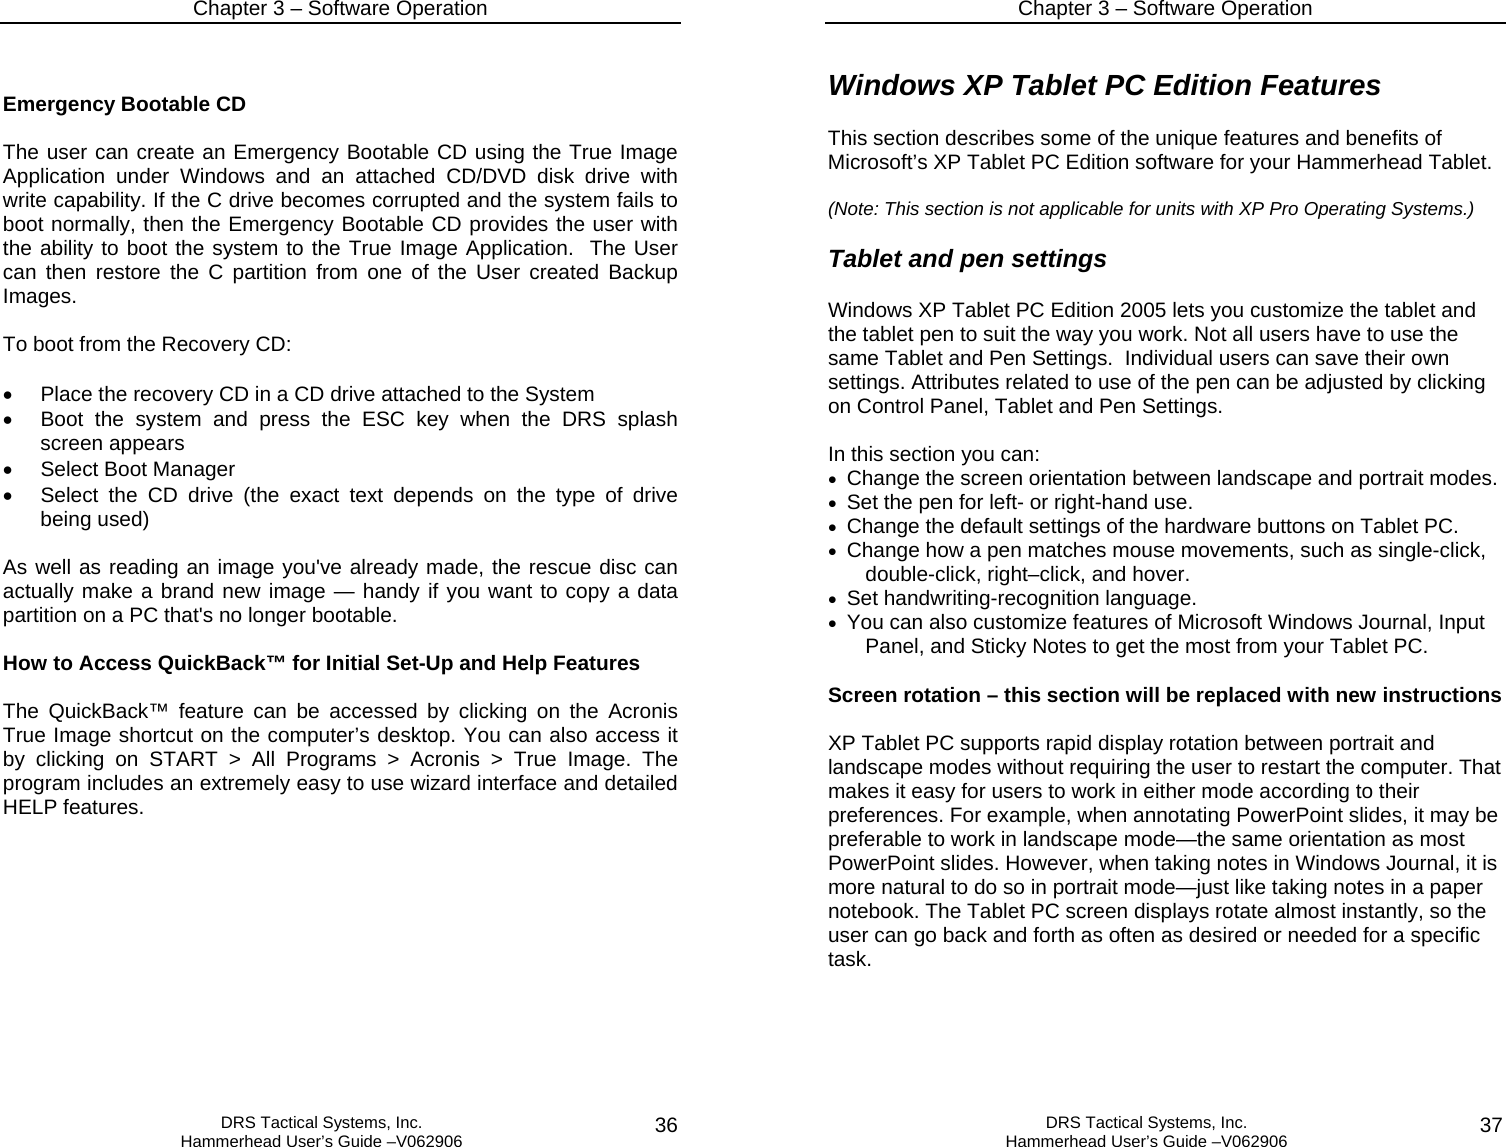 Chapter 3 – Software Operation   DRS Tactical Systems, Inc.  Hammerhead User’s Guide –V062906  36 Emergency Bootable CD  The user can create an Emergency Bootable CD using the True Image Application under Windows and an attached CD/DVD disk drive with write capability. If the C drive becomes corrupted and the system fails to boot normally, then the Emergency Bootable CD provides the user with the ability to boot the system to the True Image Application.  The User can then restore the C partition from one of the User created Backup Images.    To boot from the Recovery CD:  •  Place the recovery CD in a CD drive attached to the System •  Boot the system and press the ESC key when the DRS splash screen appears •  Select Boot Manager •  Select the CD drive (the exact text depends on the type of drive being used)  As well as reading an image you&apos;ve already made, the rescue disc can actually make a brand new image — handy if you want to copy a data partition on a PC that&apos;s no longer bootable.  How to Access QuickBack™ for Initial Set-Up and Help Features  The QuickBack™ feature can be accessed by clicking on the Acronis True Image shortcut on the computer’s desktop. You can also access it by clicking on START &gt; All Programs &gt; Acronis &gt; True Image. The program includes an extremely easy to use wizard interface and detailed HELP features. Chapter 3 – Software Operation   DRS Tactical Systems, Inc.  Hammerhead User’s Guide –V062906  37 Windows XP Tablet PC Edition Features  This section describes some of the unique features and benefits of Microsoft’s XP Tablet PC Edition software for your Hammerhead Tablet.   (Note: This section is not applicable for units with XP Pro Operating Systems.)  Tablet and pen settings  Windows XP Tablet PC Edition 2005 lets you customize the tablet and the tablet pen to suit the way you work. Not all users have to use the same Tablet and Pen Settings.  Individual users can save their own settings. Attributes related to use of the pen can be adjusted by clicking on Control Panel, Tablet and Pen Settings.   In this section you can:  • Change the screen orientation between landscape and portrait modes.  • Set the pen for left- or right-hand use.  • Change the default settings of the hardware buttons on Tablet PC.  • Change how a pen matches mouse movements, such as single-click, double-click, right–click, and hover.  • Set handwriting-recognition language.  • You can also customize features of Microsoft Windows Journal, Input Panel, and Sticky Notes to get the most from your Tablet PC.  Screen rotation – this section will be replaced with new instructions  XP Tablet PC supports rapid display rotation between portrait and landscape modes without requiring the user to restart the computer. That makes it easy for users to work in either mode according to their preferences. For example, when annotating PowerPoint slides, it may be preferable to work in landscape mode—the same orientation as most PowerPoint slides. However, when taking notes in Windows Journal, it is more natural to do so in portrait mode—just like taking notes in a paper notebook. The Tablet PC screen displays rotate almost instantly, so the user can go back and forth as often as desired or needed for a specific task.  